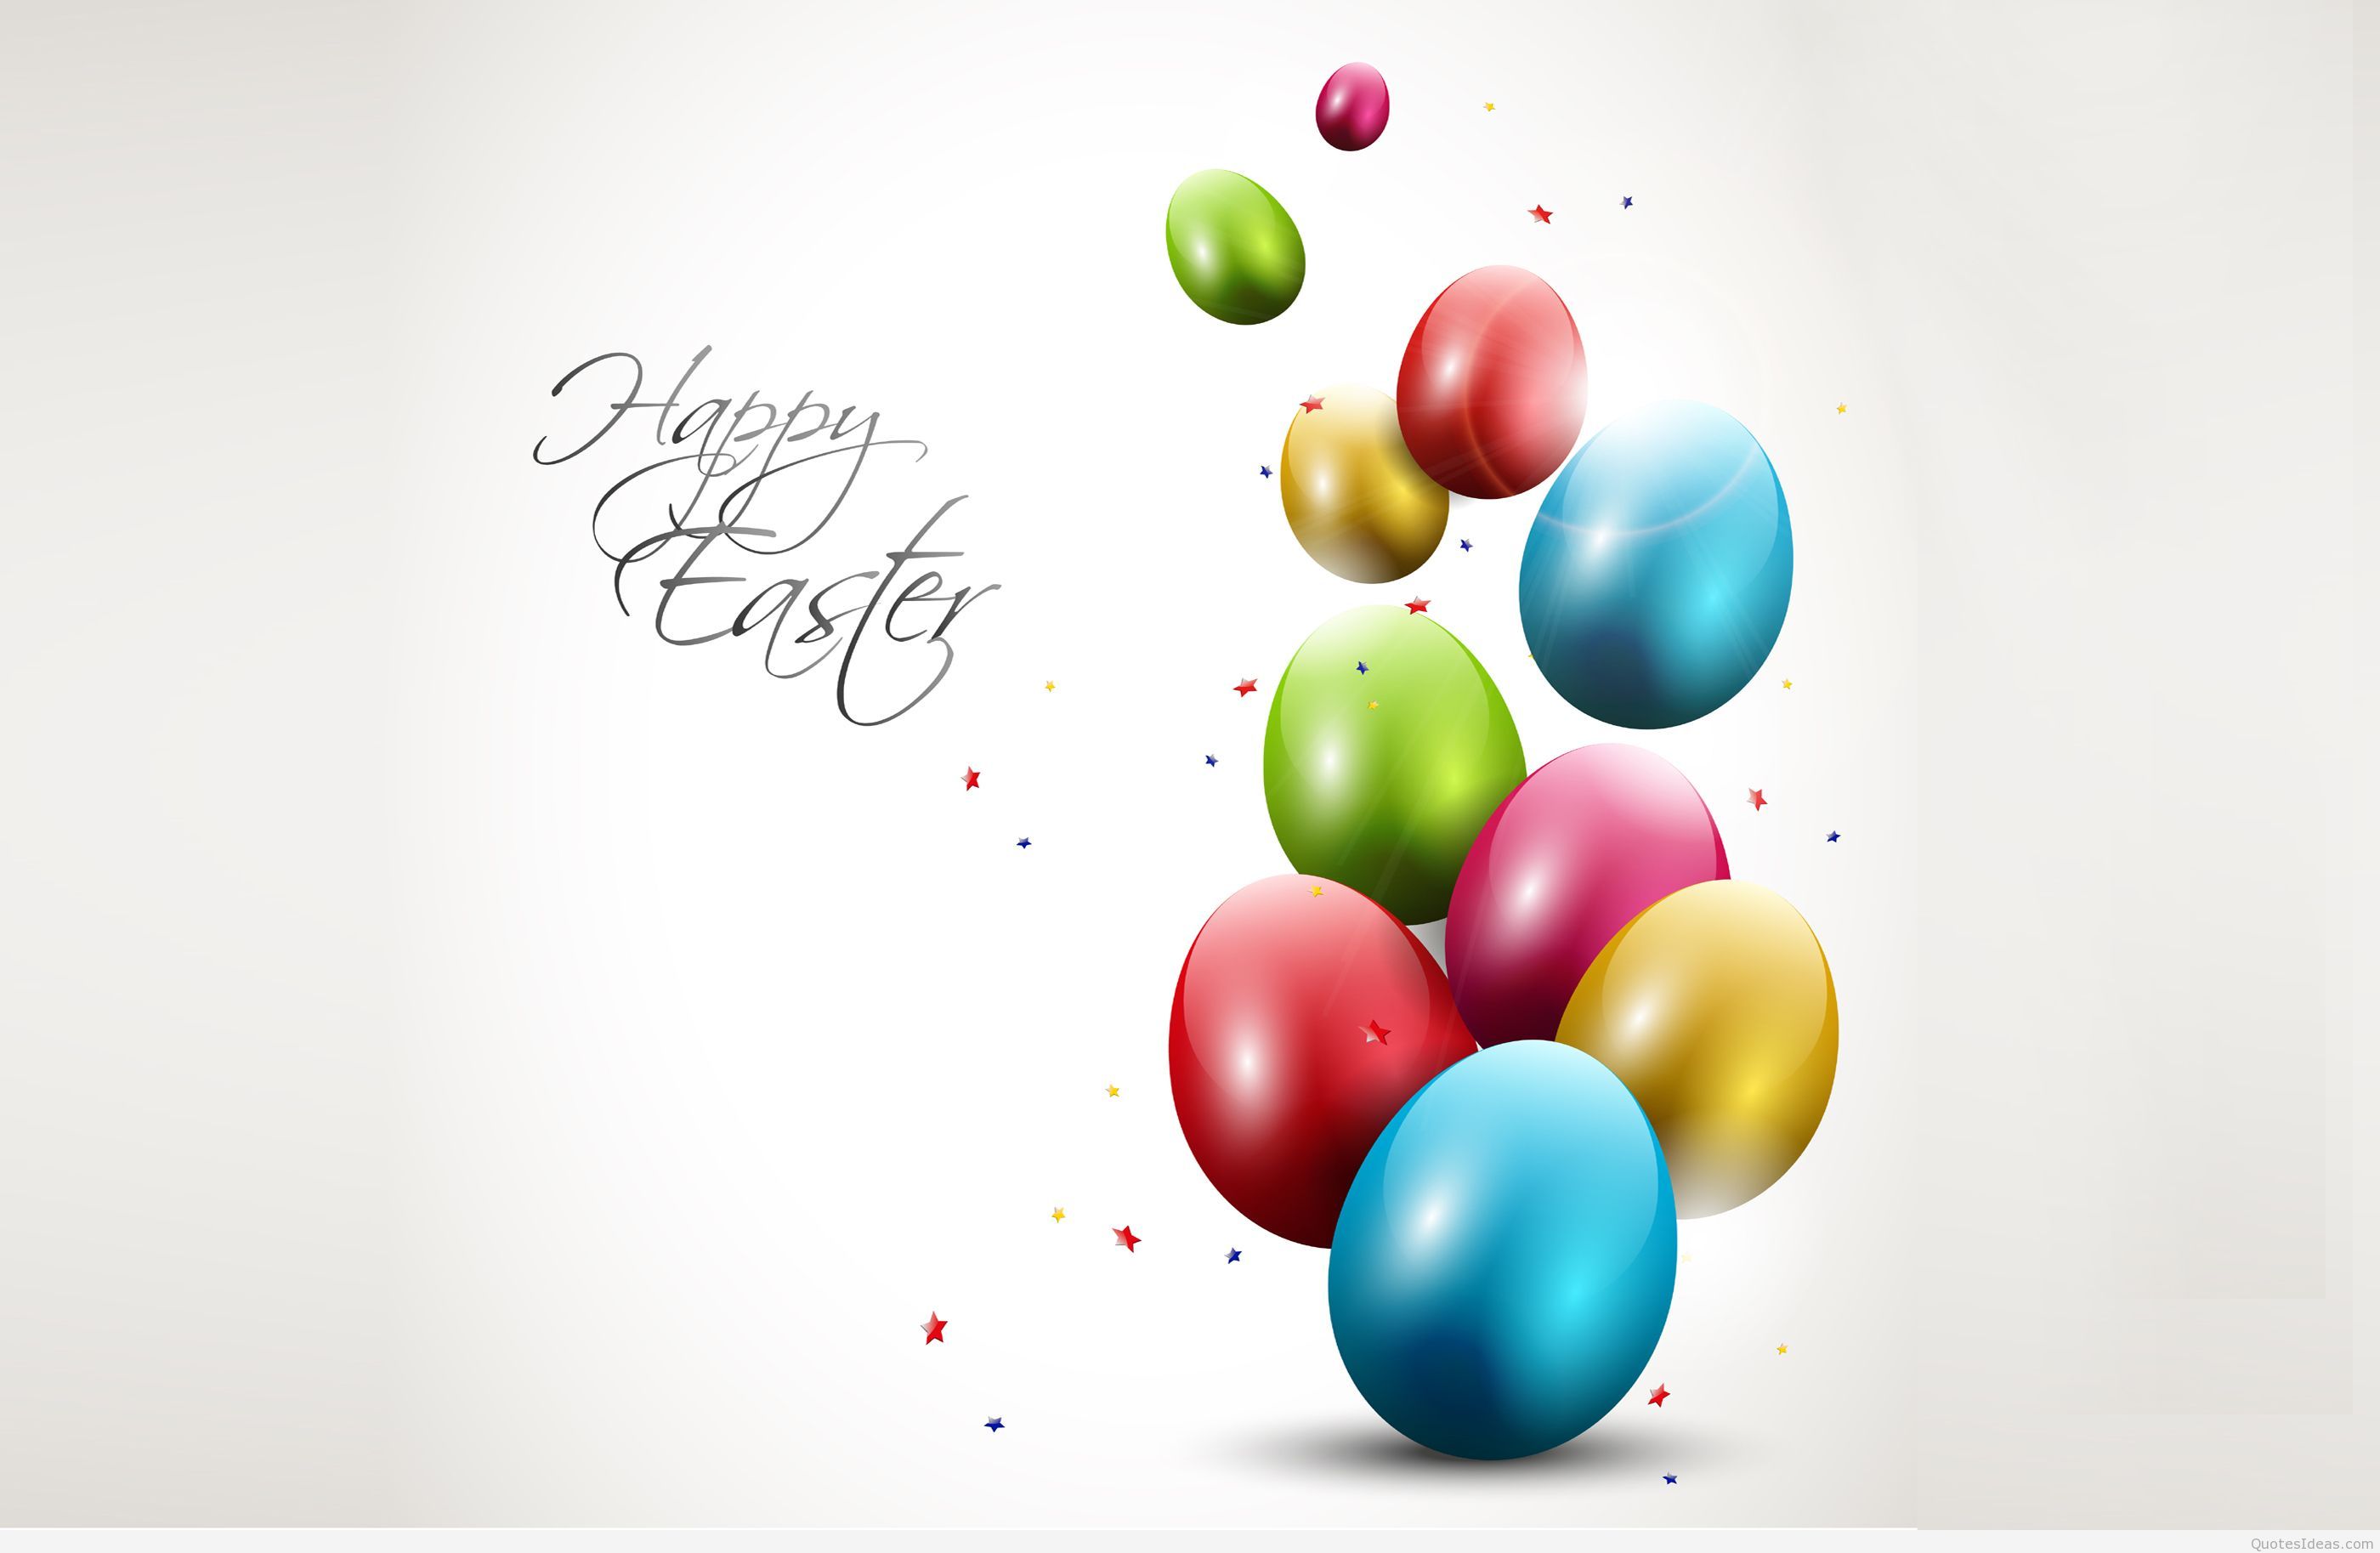 Happy Easter sunday wallpaper HD wishes